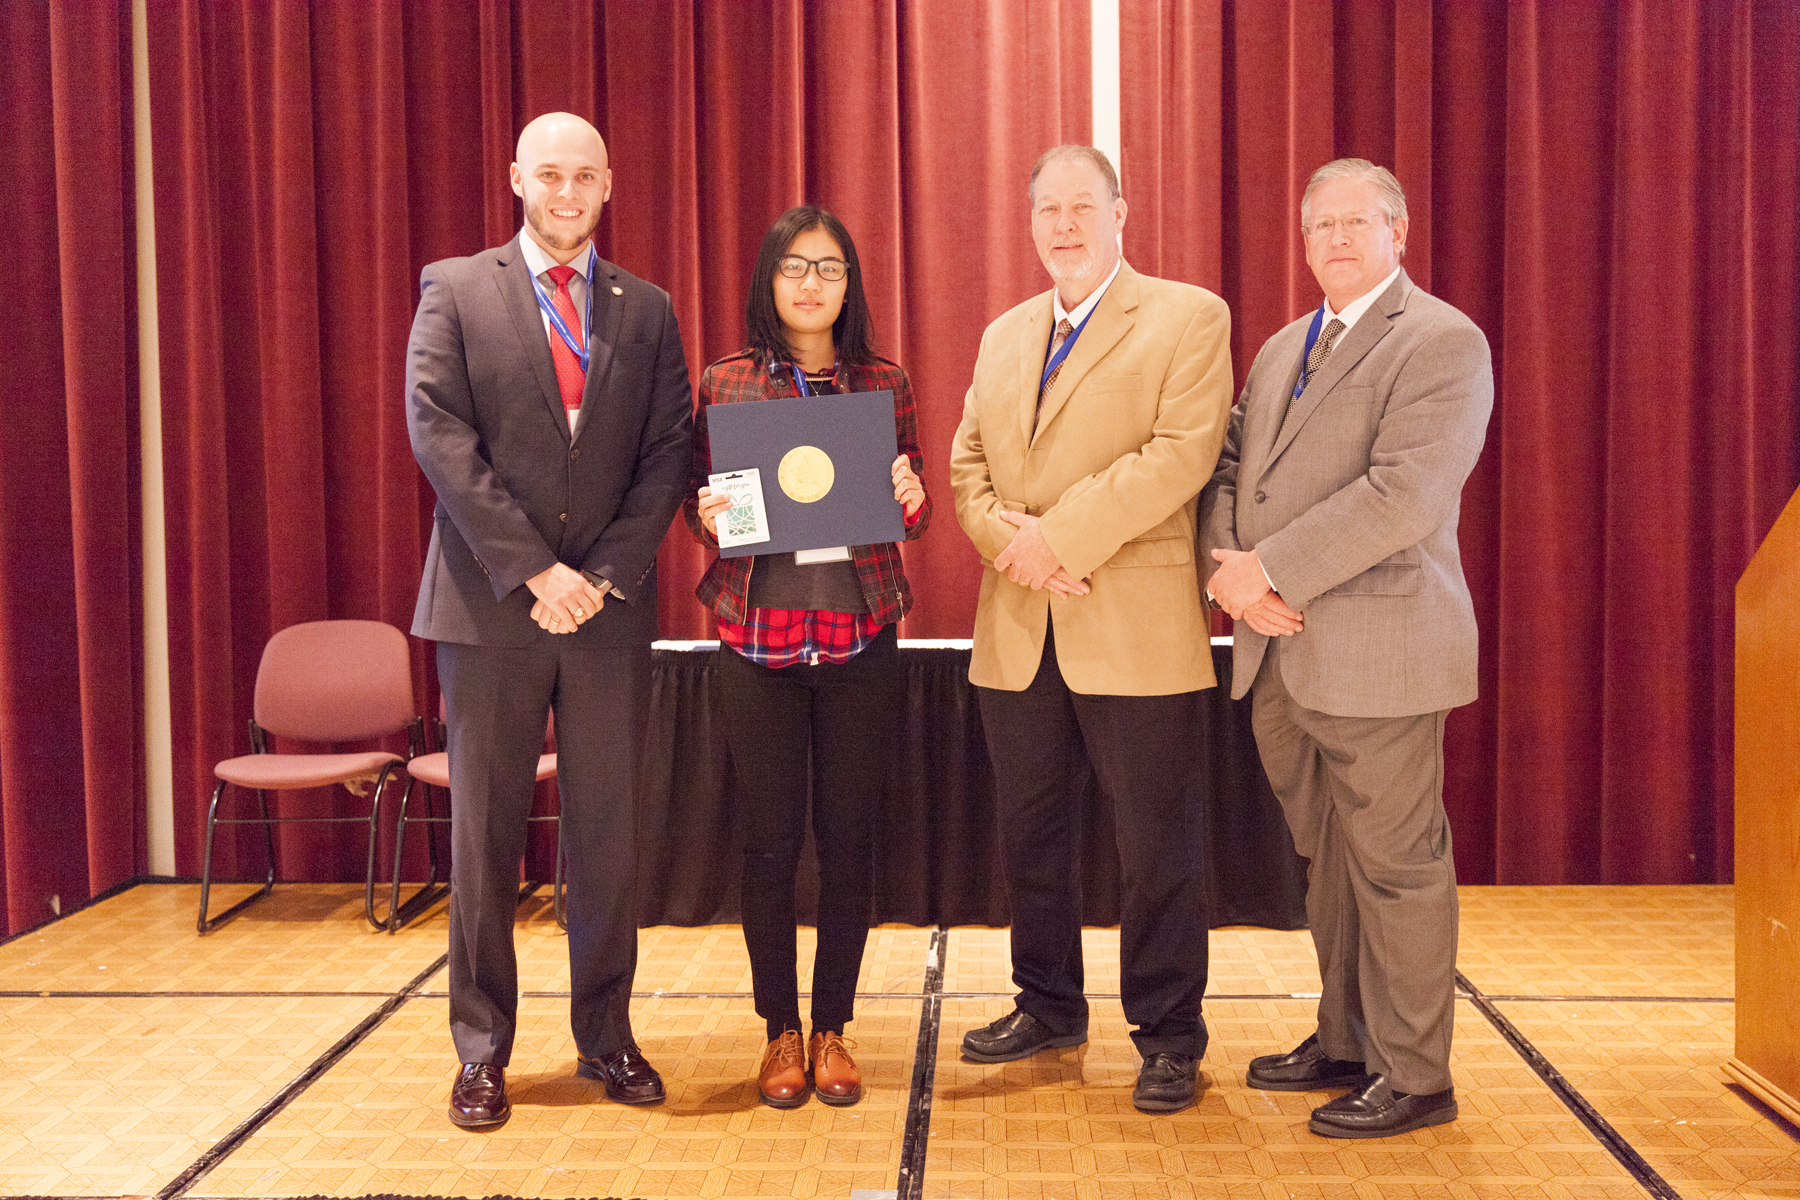   Ning Lee – OSU - wins 2nd Place in the Oklahoma Transportation Research Day Poster Competition for her work titled “Laboratory Test on Slab/Base Friction in Concrete Pavement”.  